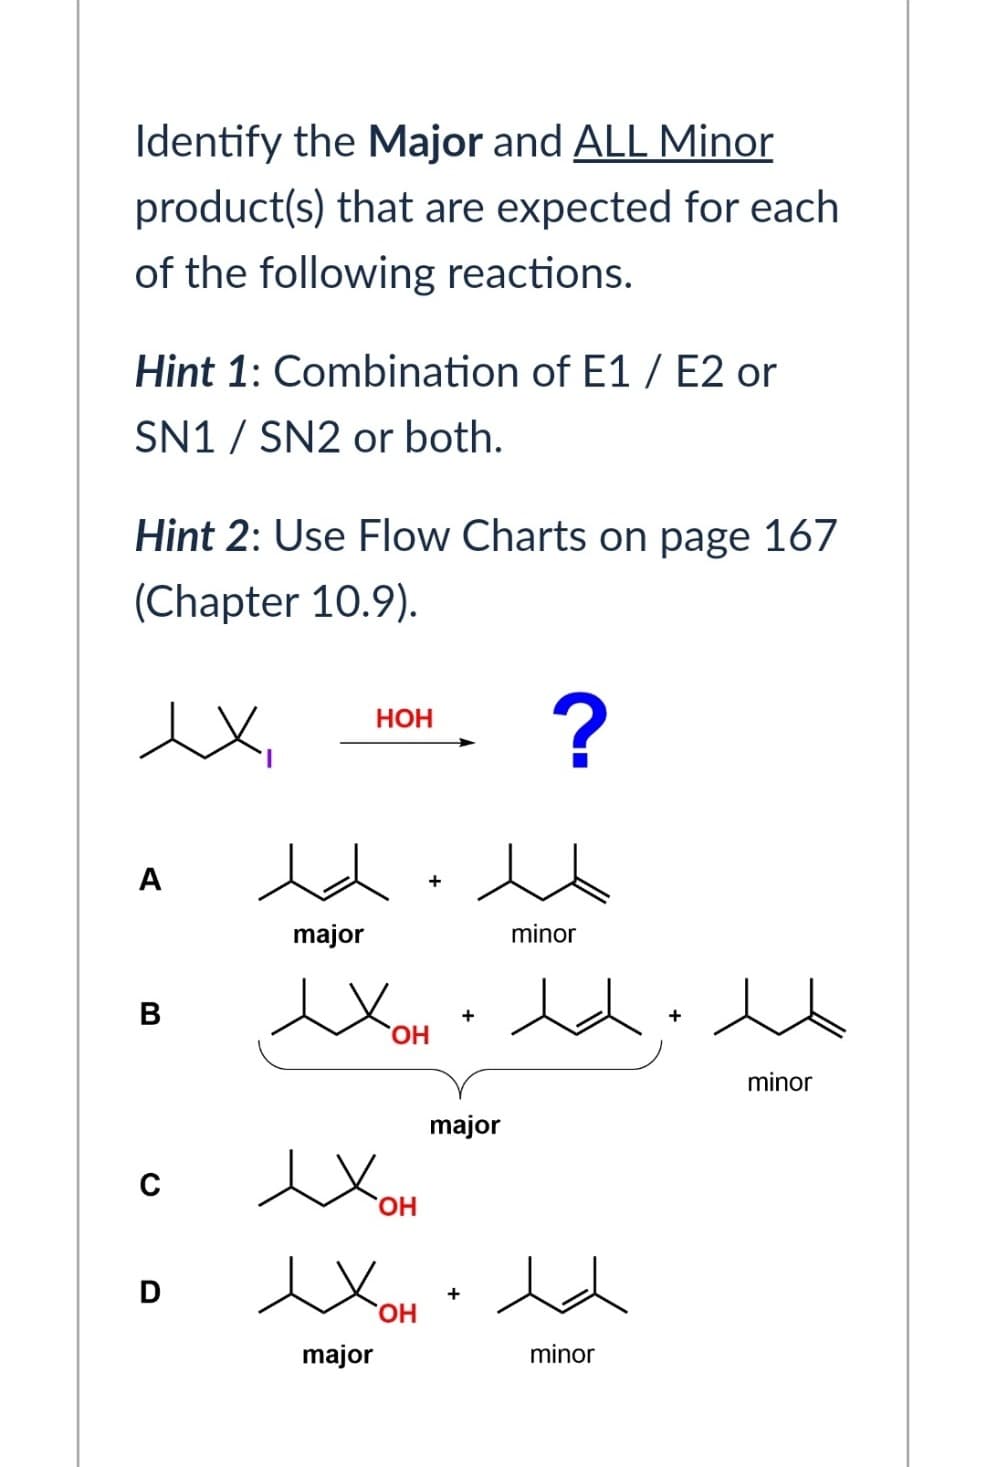 Identify the Major and ALL Minor
product(s) that are expected for each
of the following reactions.
Hint 1: Combination of E1/E2 or
SN1/SN2 or both.
Hint 2: Use Flow Charts on page 167
(Chapter 10.9).
ex
HOH
?
A
B
+
major
minor
exOH ·dd: ht
Хон
+
minor
с
Хон
OH
D
ex OH
major
major
+
minor